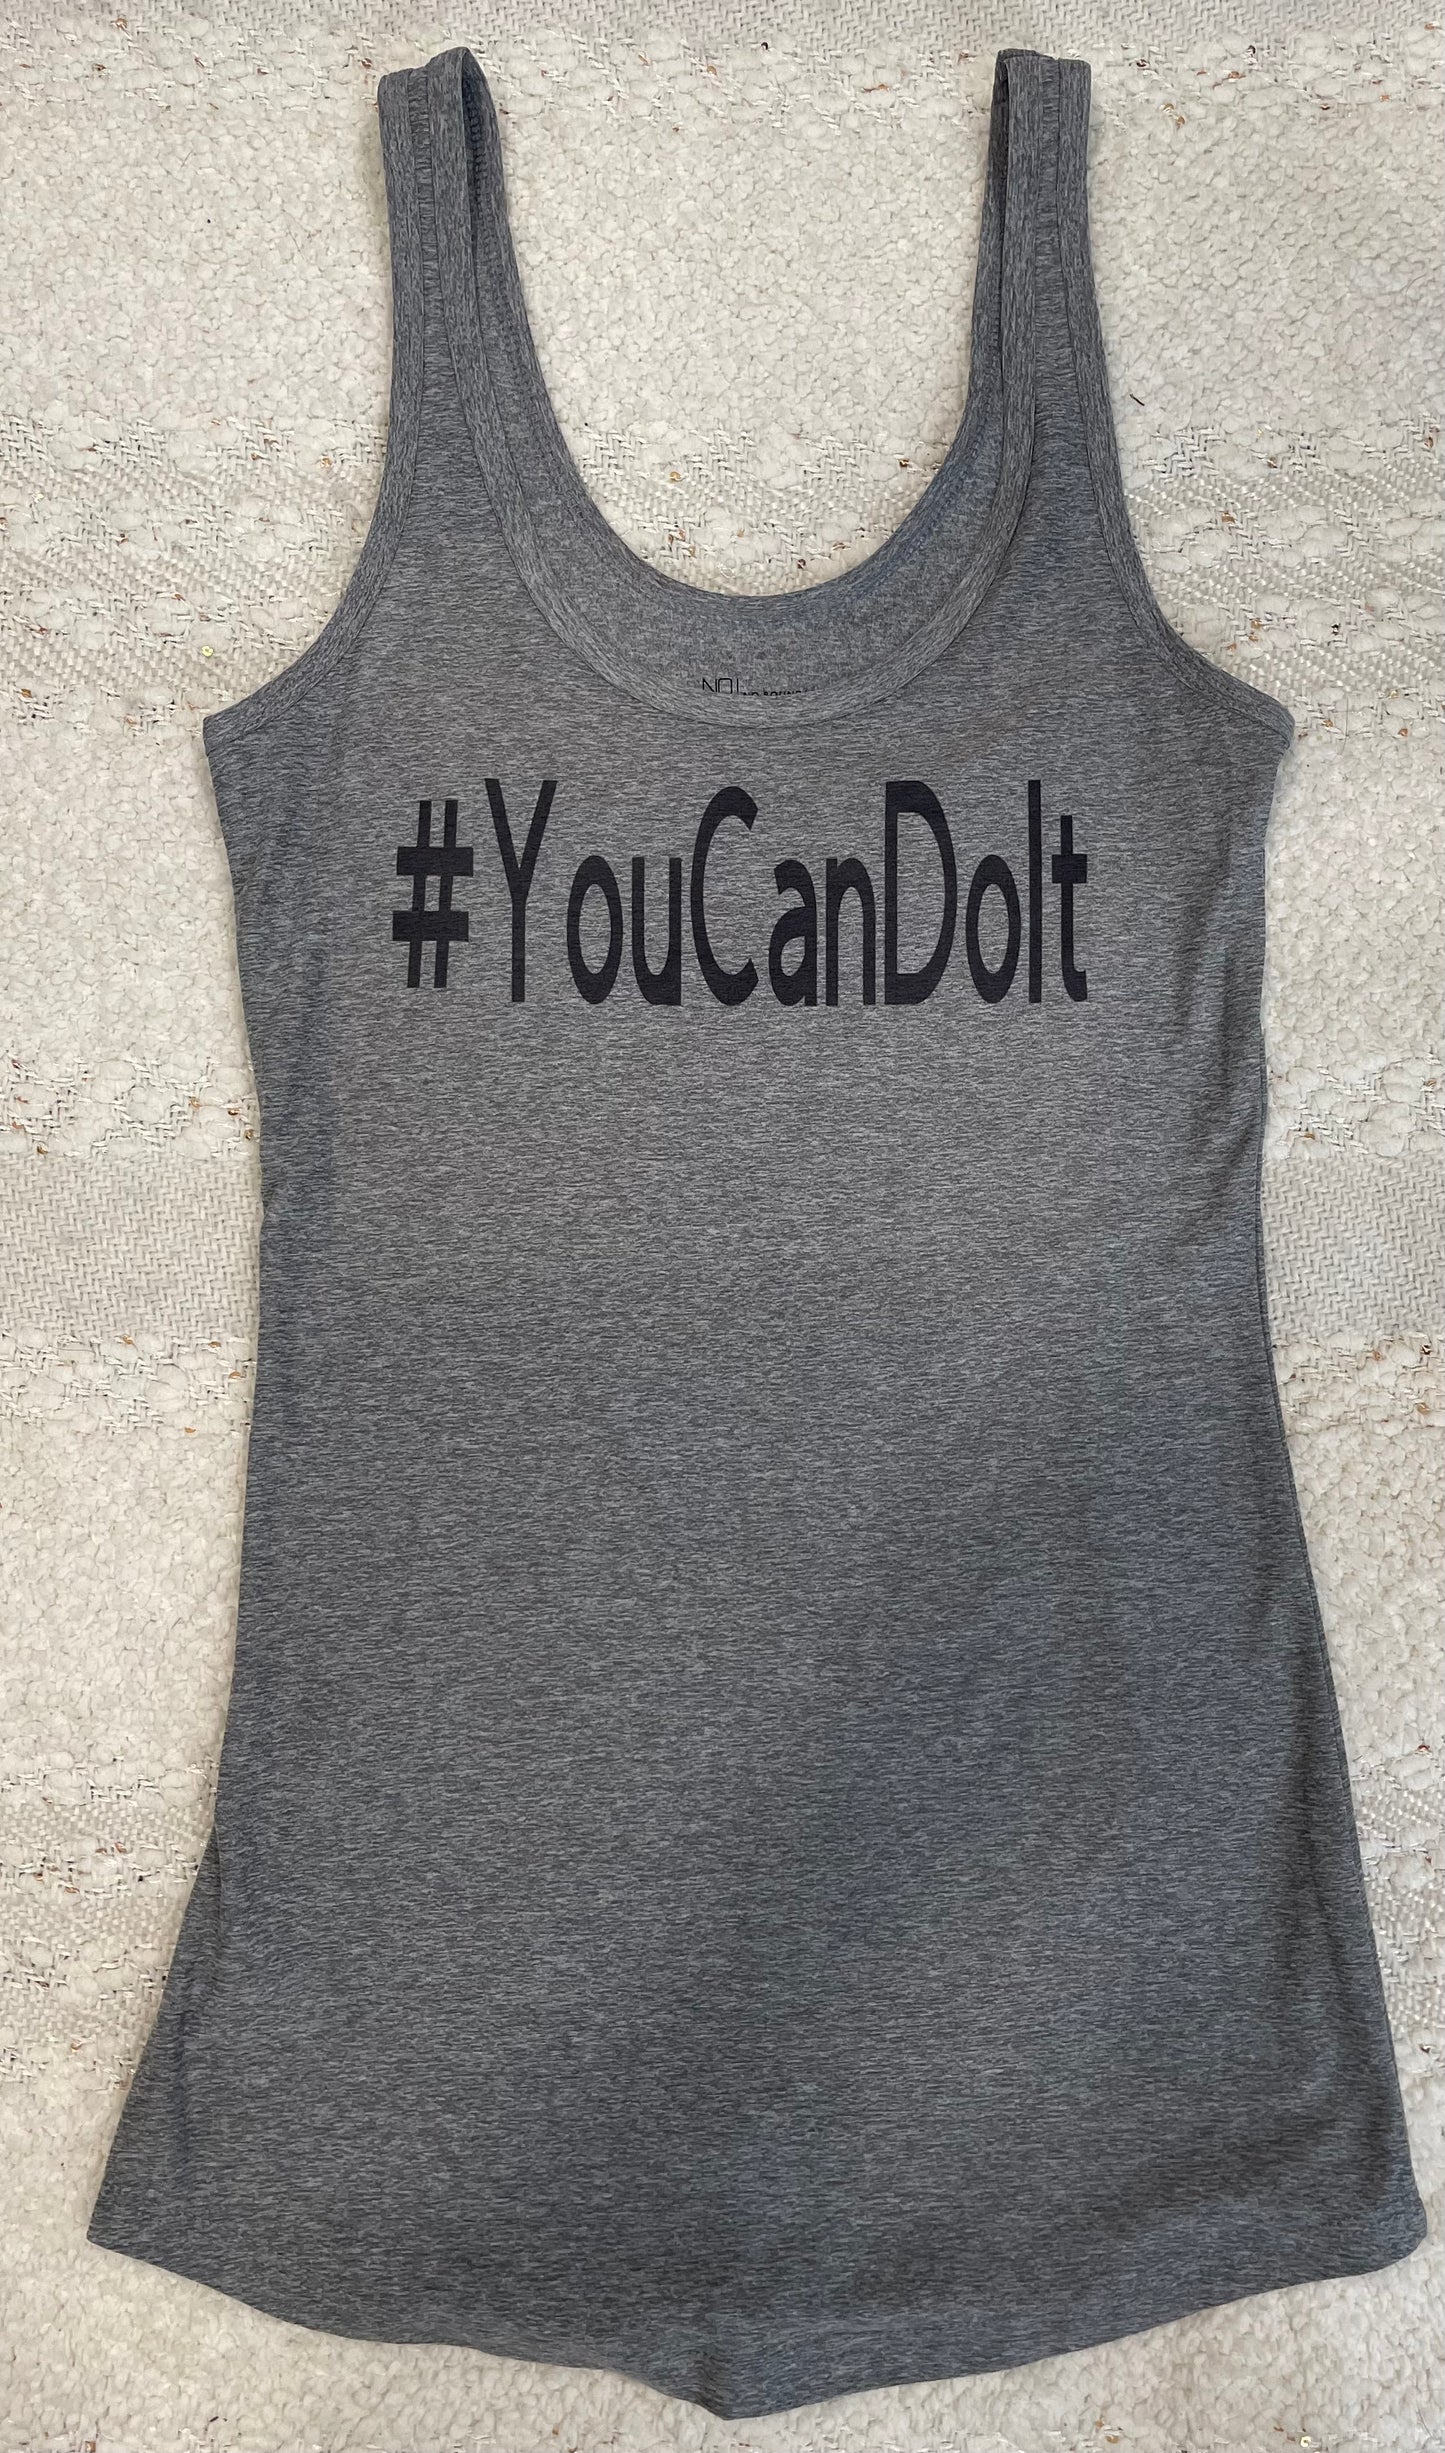 Adult size small tank top